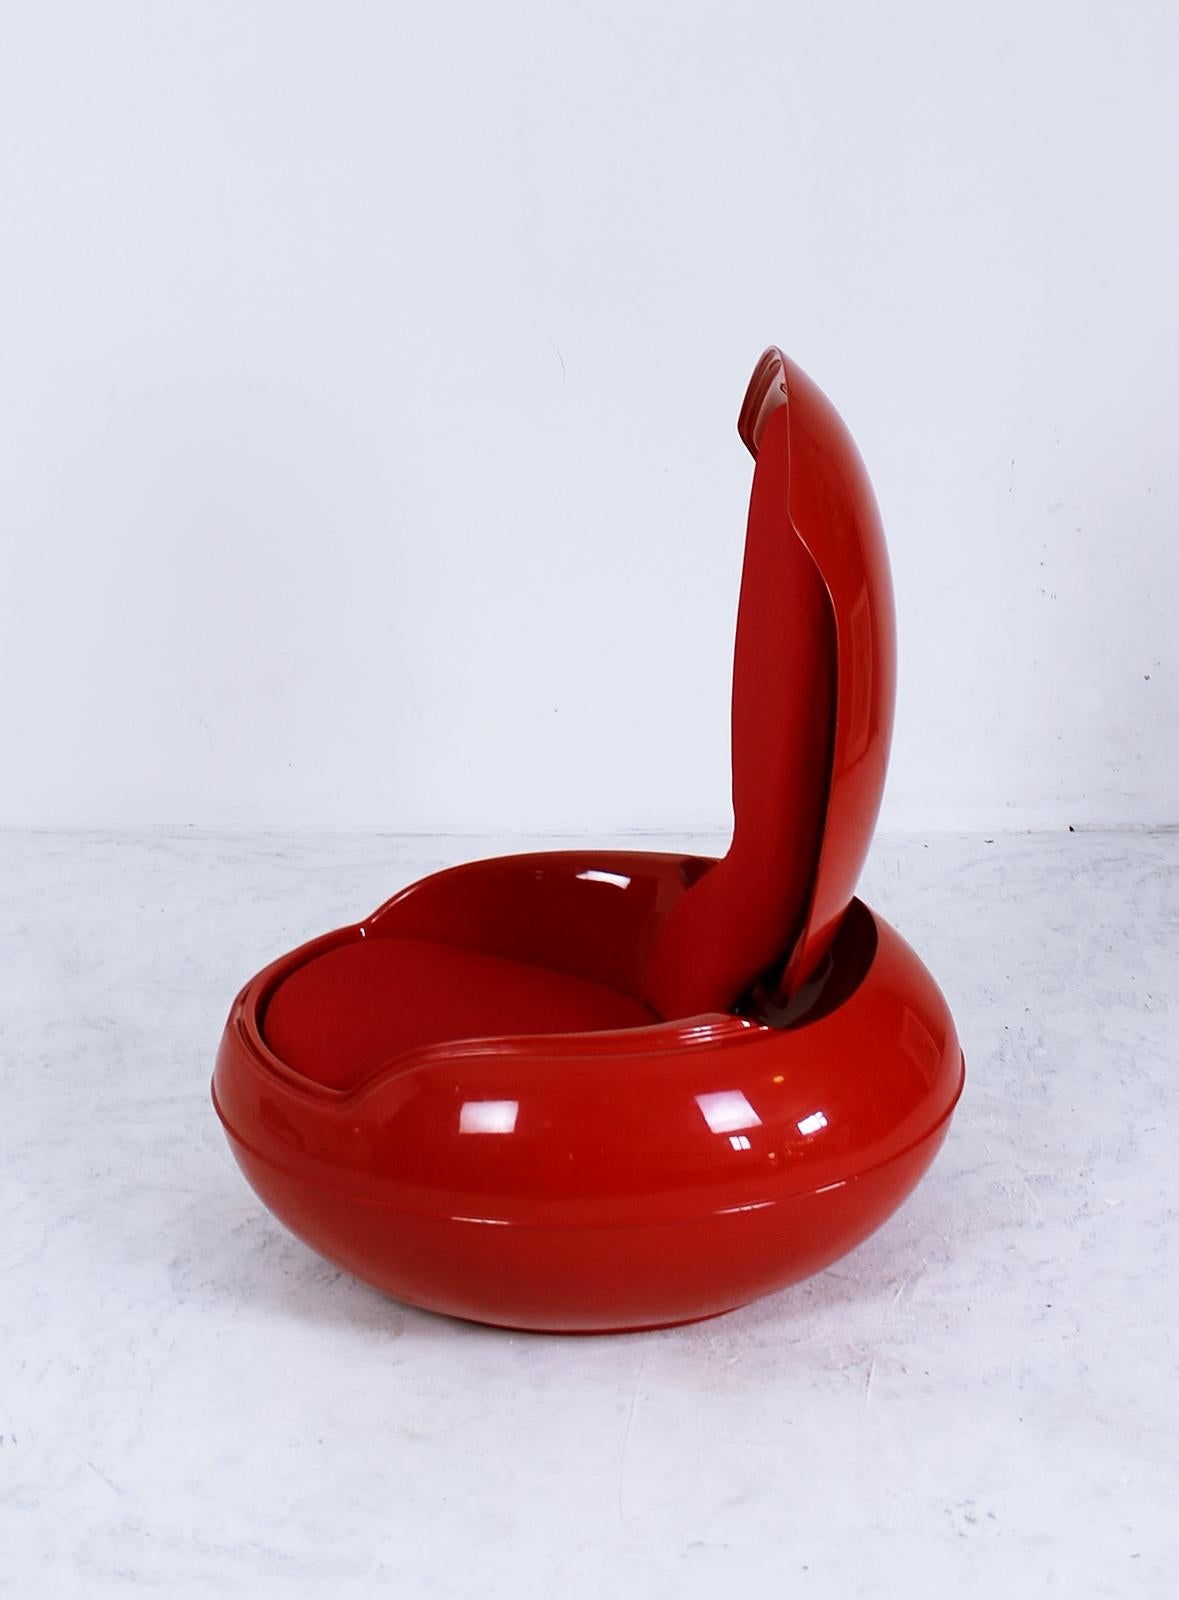 The garden egg chair was designed by Peter Ghyczy in 1968. It was manufactured by Reuter Products. The chair was designed for both indoor and outdoor use, although as a design icon and collectable it is rarely used outdoors. The chair lid lifts and